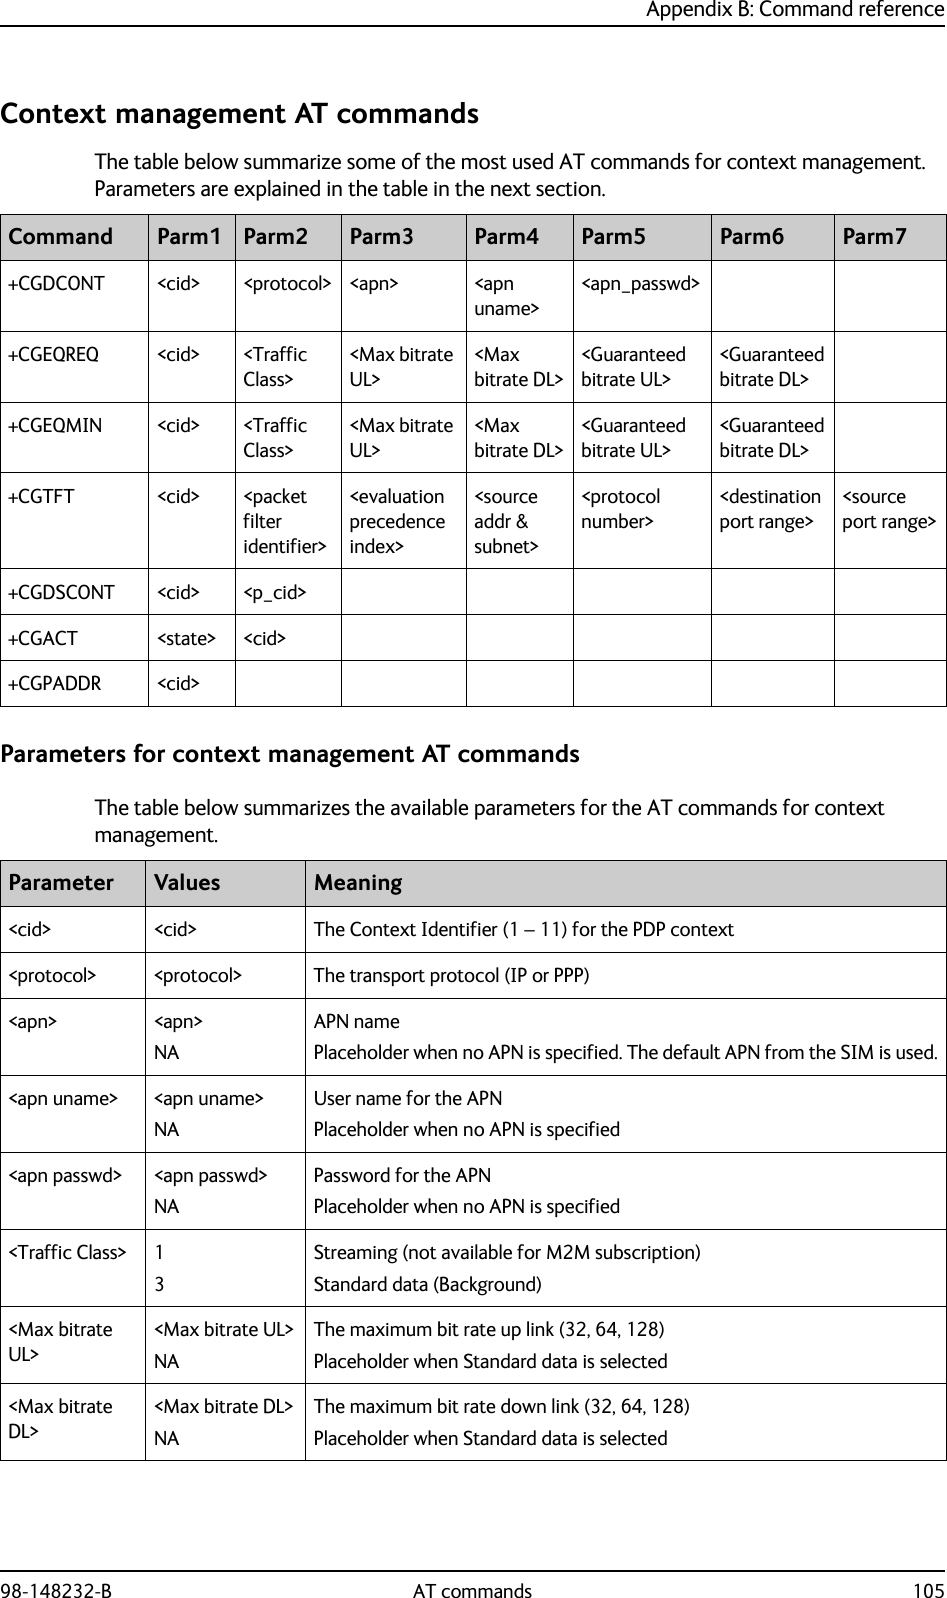 Appendix B: Command reference98-148232-B AT commands 105Context management AT commandsThe table below summarize some of the most used AT commands for context management. Parameters are explained in the table in the next section.Parameters for context management AT commandsThe table below summarizes the available parameters for the AT commands for context management.Command Parm1 Parm2 Parm3 Parm4 Parm5 Parm6 Parm7+CGDCONT &lt;cid&gt; &lt;protocol&gt; &lt;apn&gt; &lt;apn uname&gt;&lt;apn_passwd&gt;+CGEQREQ &lt;cid&gt; &lt;Traffic Class&gt;&lt;Max bitrate UL&gt;&lt;Max bitrate DL&gt;&lt;Guaranteed bitrate UL&gt;&lt;Guaranteed bitrate DL&gt;+CGEQMIN &lt;cid&gt; &lt;Traffic Class&gt;&lt;Max bitrate UL&gt;&lt;Max bitrate DL&gt;&lt;Guaranteed bitrate UL&gt;&lt;Guaranteed bitrate DL&gt;+CGTFT &lt;cid&gt; &lt;packet filter identifier&gt;&lt;evaluation precedence index&gt;&lt;source addr &amp; subnet&gt;&lt;protocol number&gt;&lt;destination port range&gt;&lt;source port range&gt;+CGDSCONT &lt;cid&gt; &lt;p_cid&gt;+CGACT &lt;state&gt; &lt;cid&gt;+CGPADDR &lt;cid&gt;Parameter Values Meaning&lt;cid&gt; &lt;cid&gt; The Context Identifier (1 – 11) for the PDP context&lt;protocol&gt; &lt;protocol&gt; The transport protocol (IP or PPP)&lt;apn&gt; &lt;apn&gt;NAAPN namePlaceholder when no APN is specified. The default APN from the SIM is used.&lt;apn uname&gt; &lt;apn uname&gt;NAUser name for the APNPlaceholder when no APN is specified&lt;apn passwd&gt; &lt;apn passwd&gt;NAPassword for the APNPlaceholder when no APN is specified&lt;Traffic Class&gt; 13Streaming (not available for M2M subscription)Standard data (Background)&lt;Max bitrate UL&gt;&lt;Max bitrate UL&gt;NAThe maximum bit rate up link (32, 64, 128)Placeholder when Standard data is selected&lt;Max bitrate DL&gt;&lt;Max bitrate DL&gt;NAThe maximum bit rate down link (32, 64, 128)Placeholder when Standard data is selected